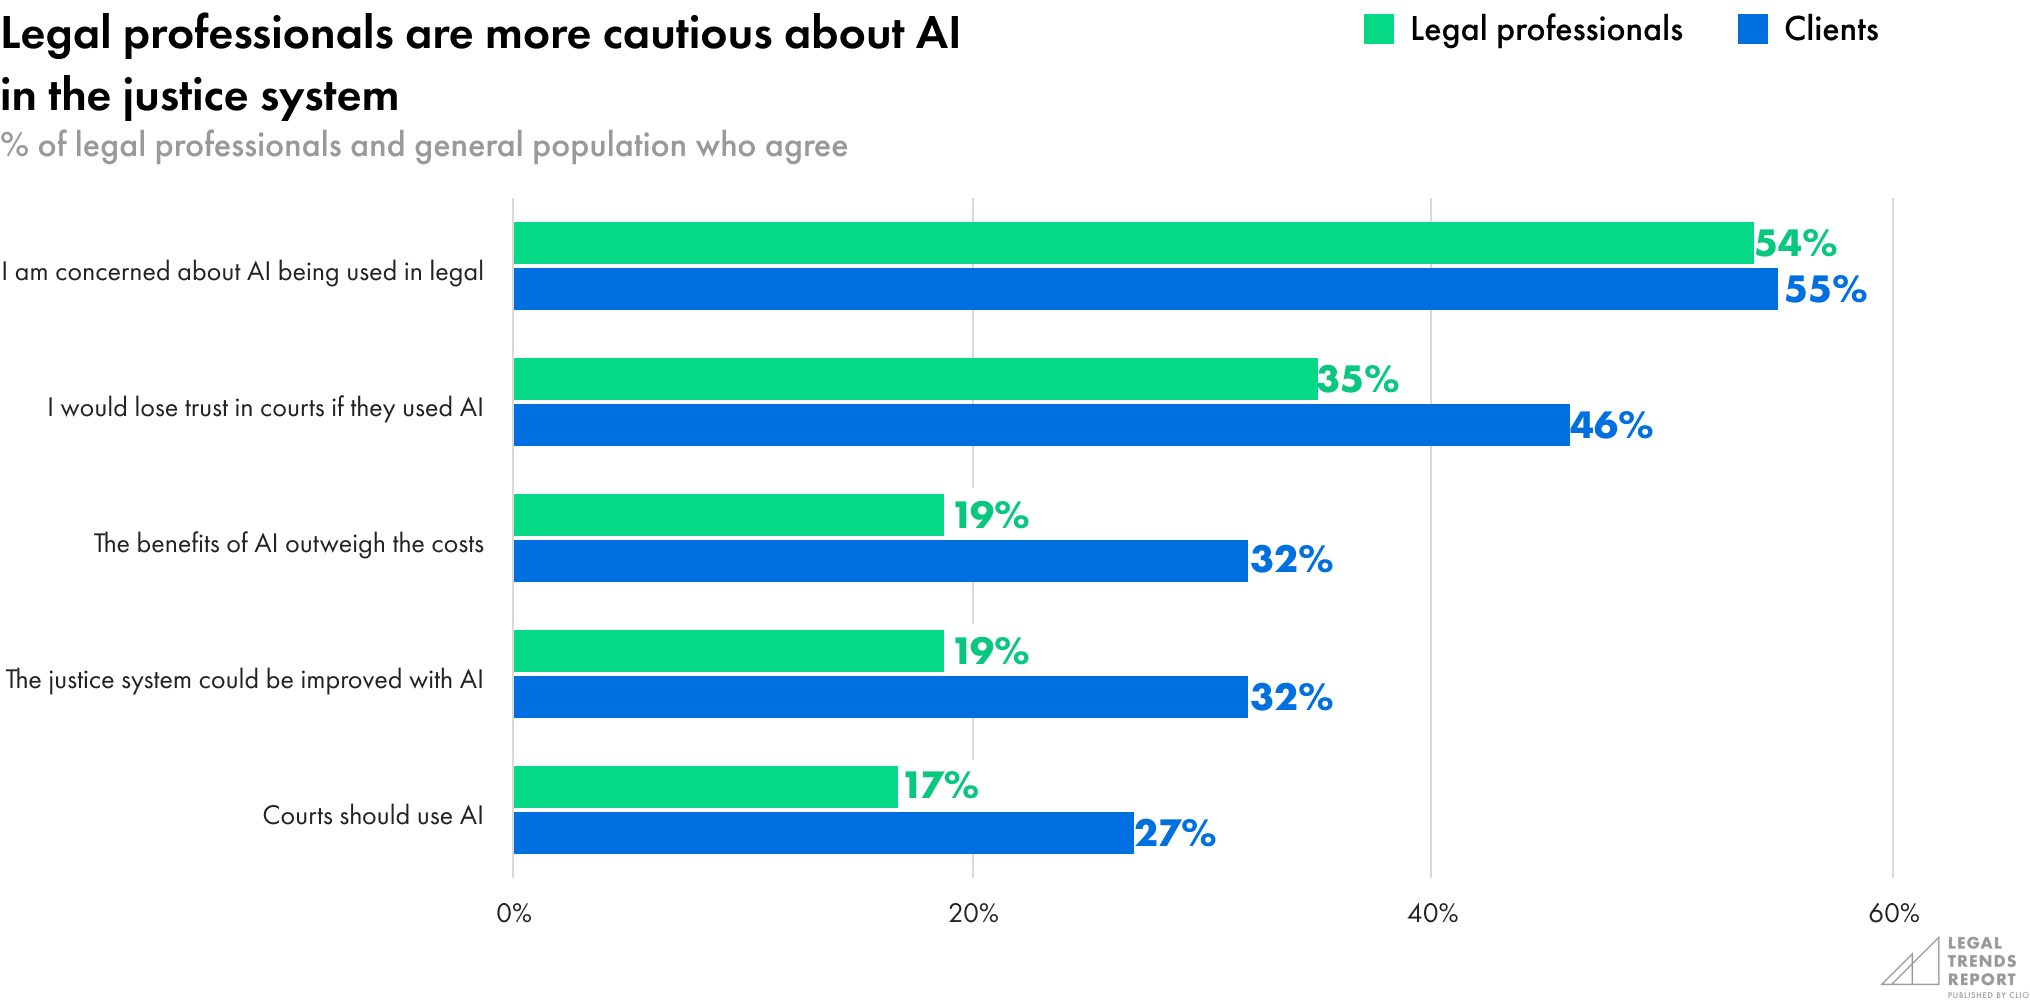 Legal professionals are more cautious about AI in the justice system